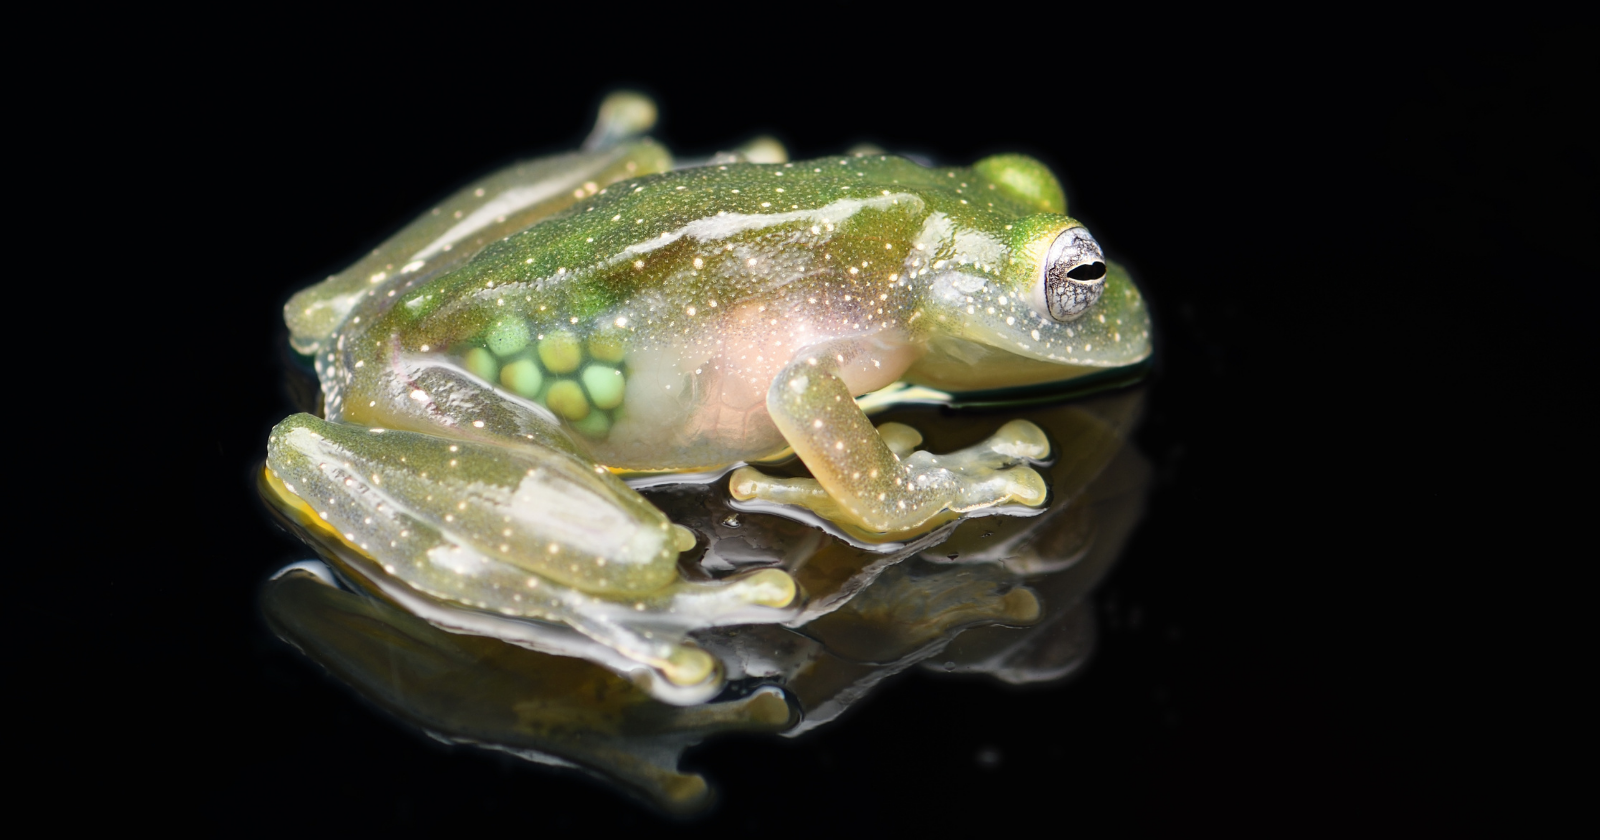 Two new species of glass frogs found in Ecuador: an exceptional discovery